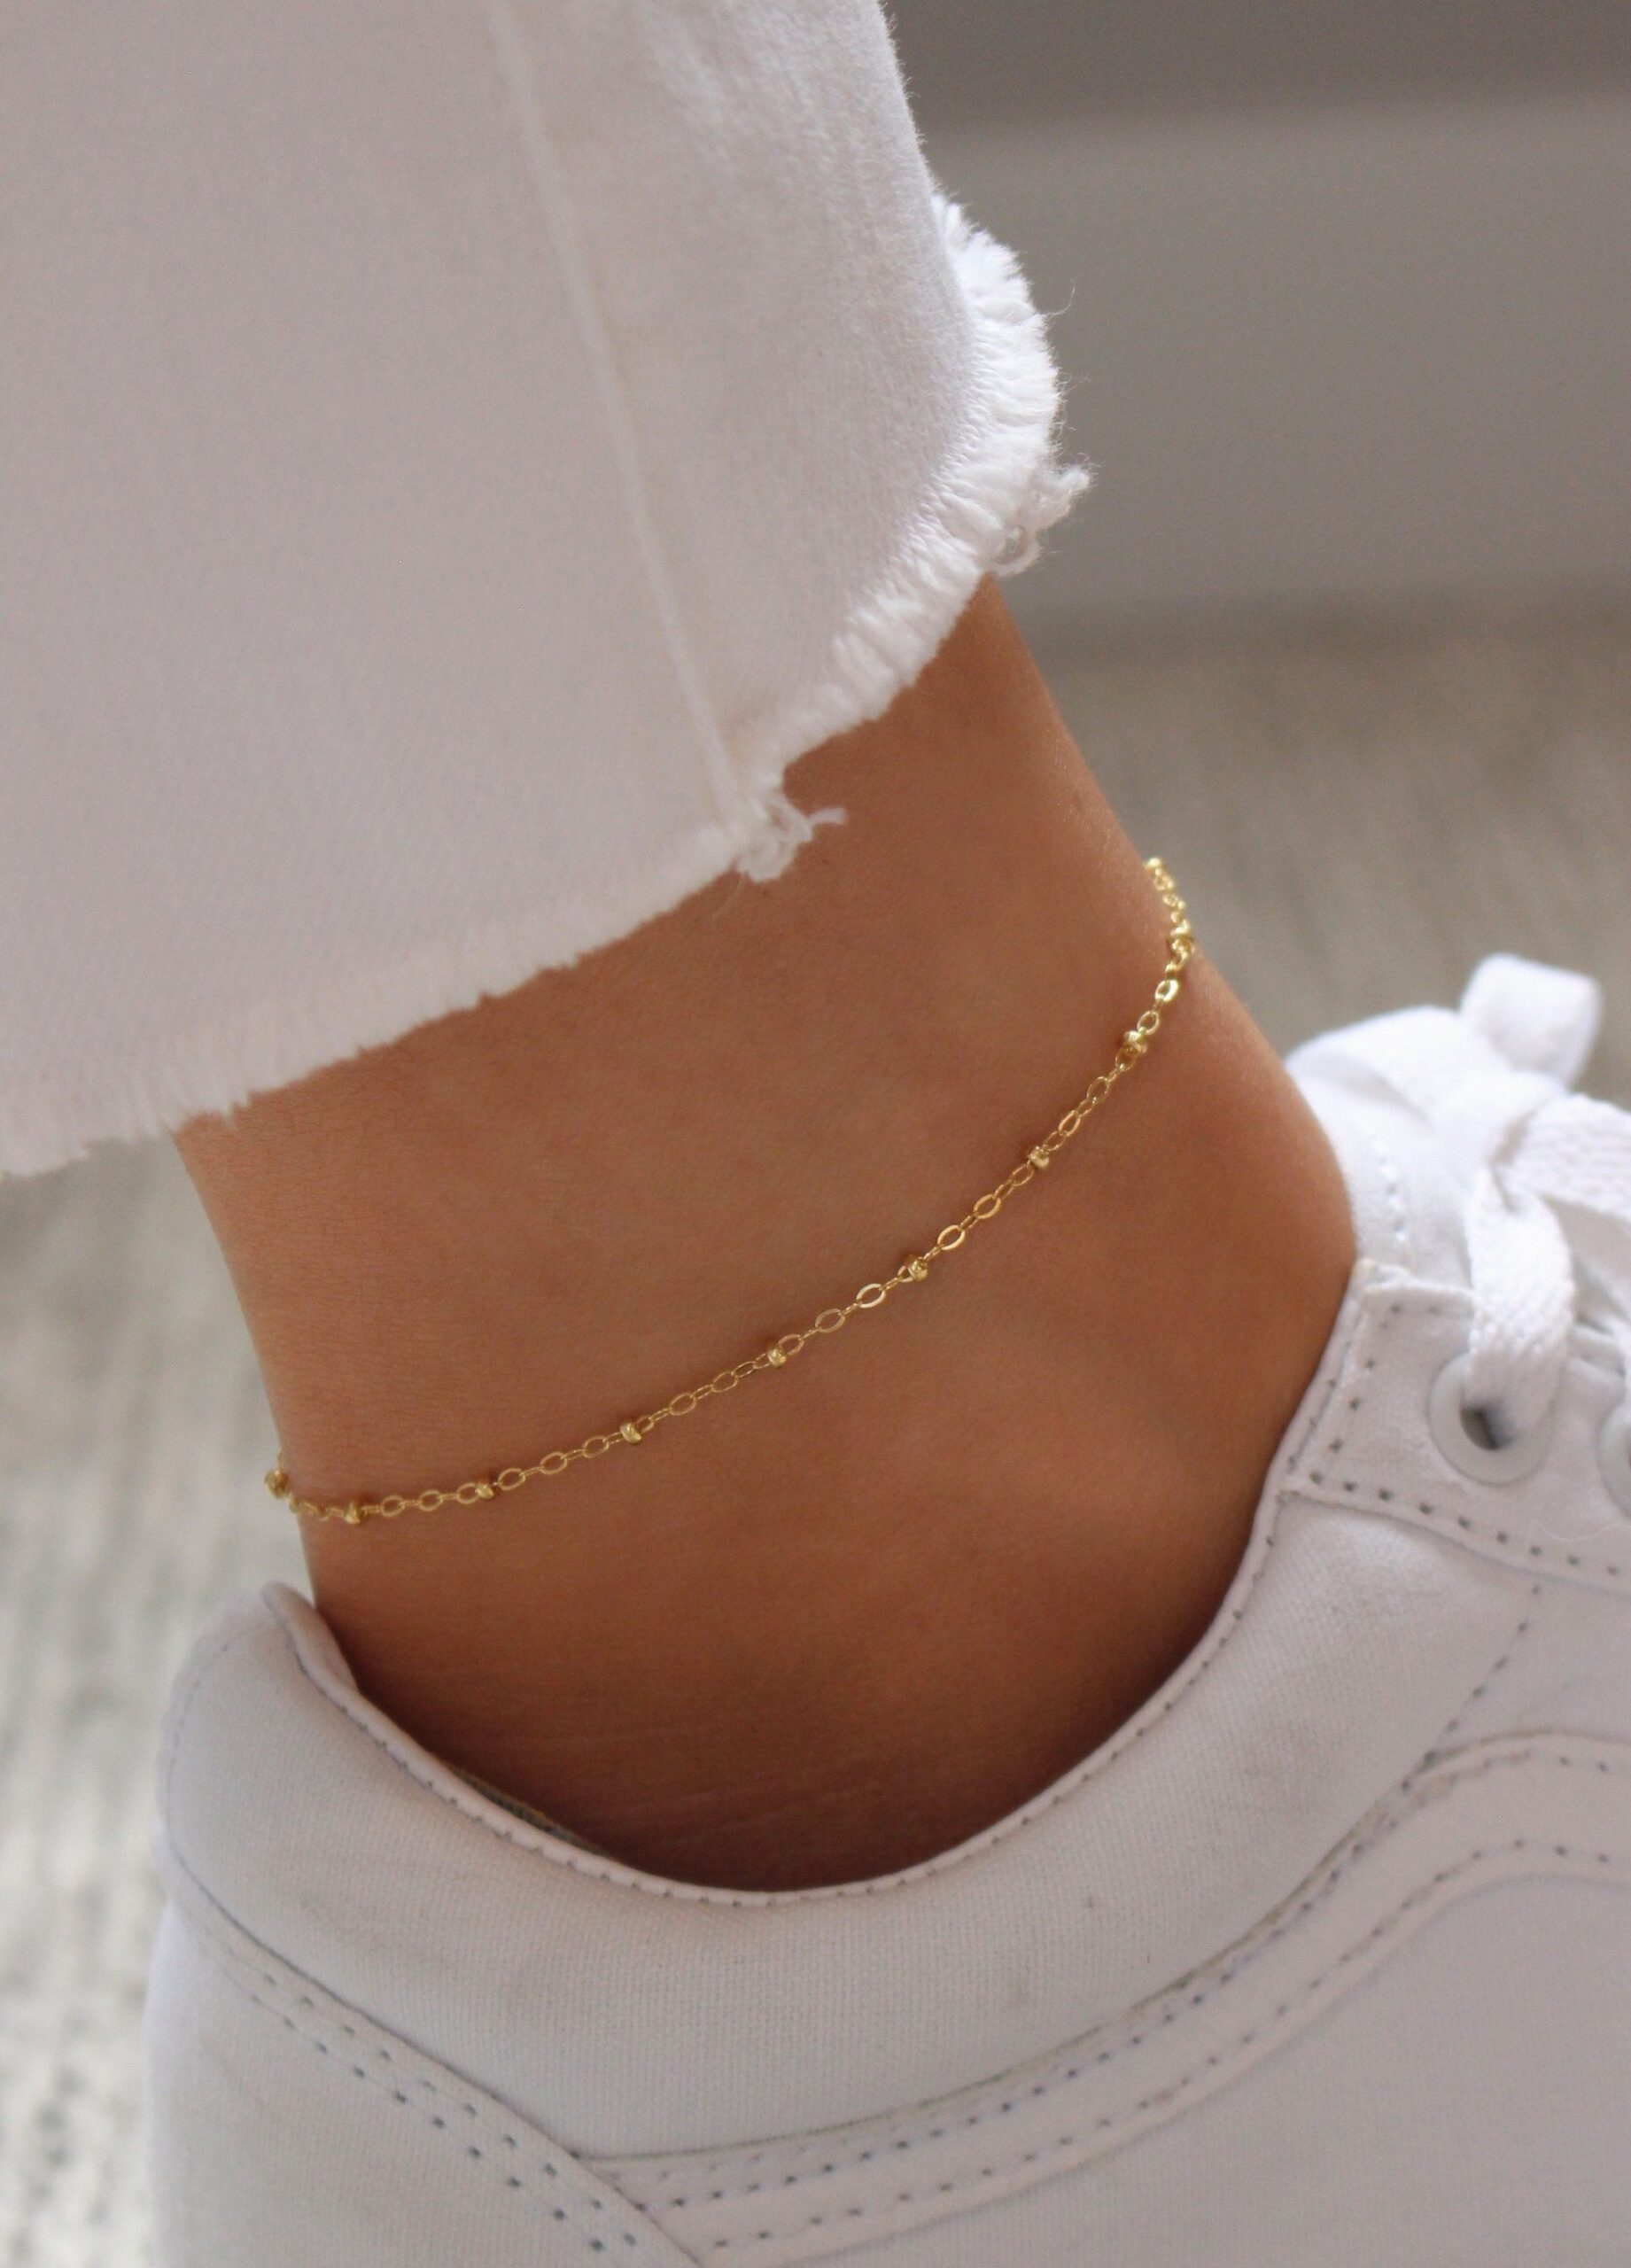 The Allure of Anklets: Why Gold Anklets
are Making a Comeback